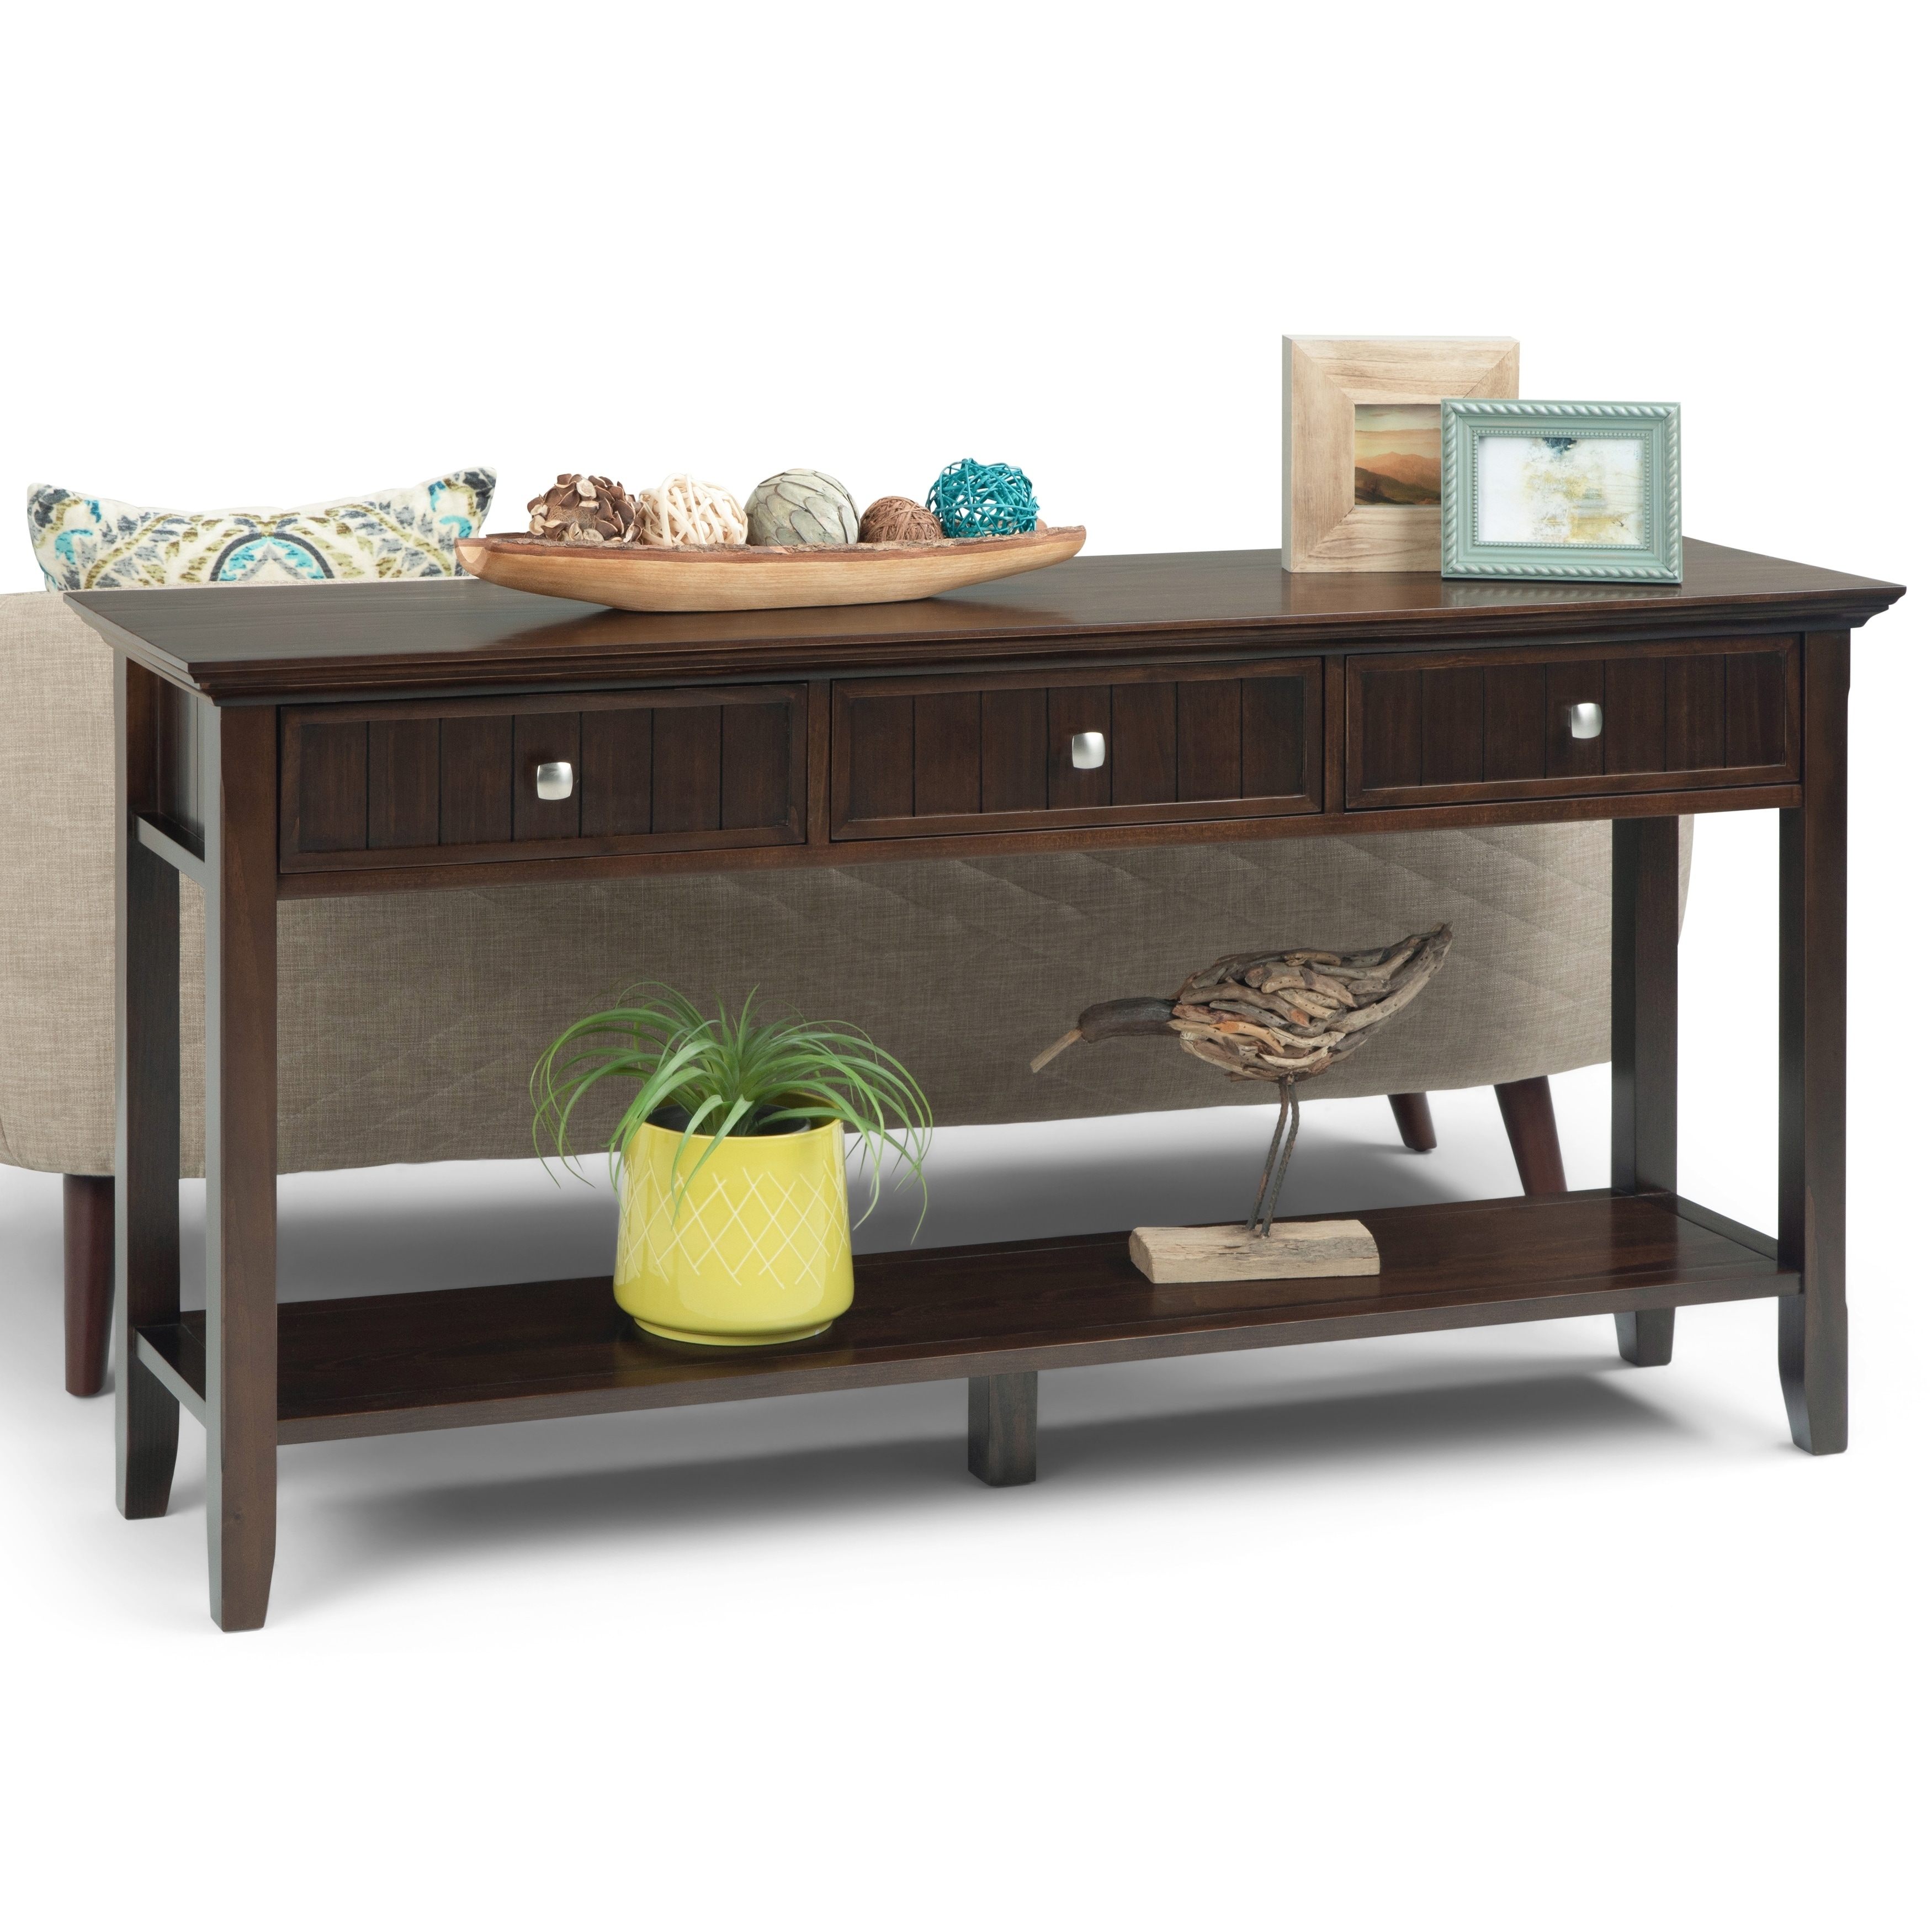 Wyndenhall Normandy Solid Wood 60 Inch Wide Rustic Wide Console Sofa Table 60 X 16 X 30 Overstock 27759186 Brunette Brown